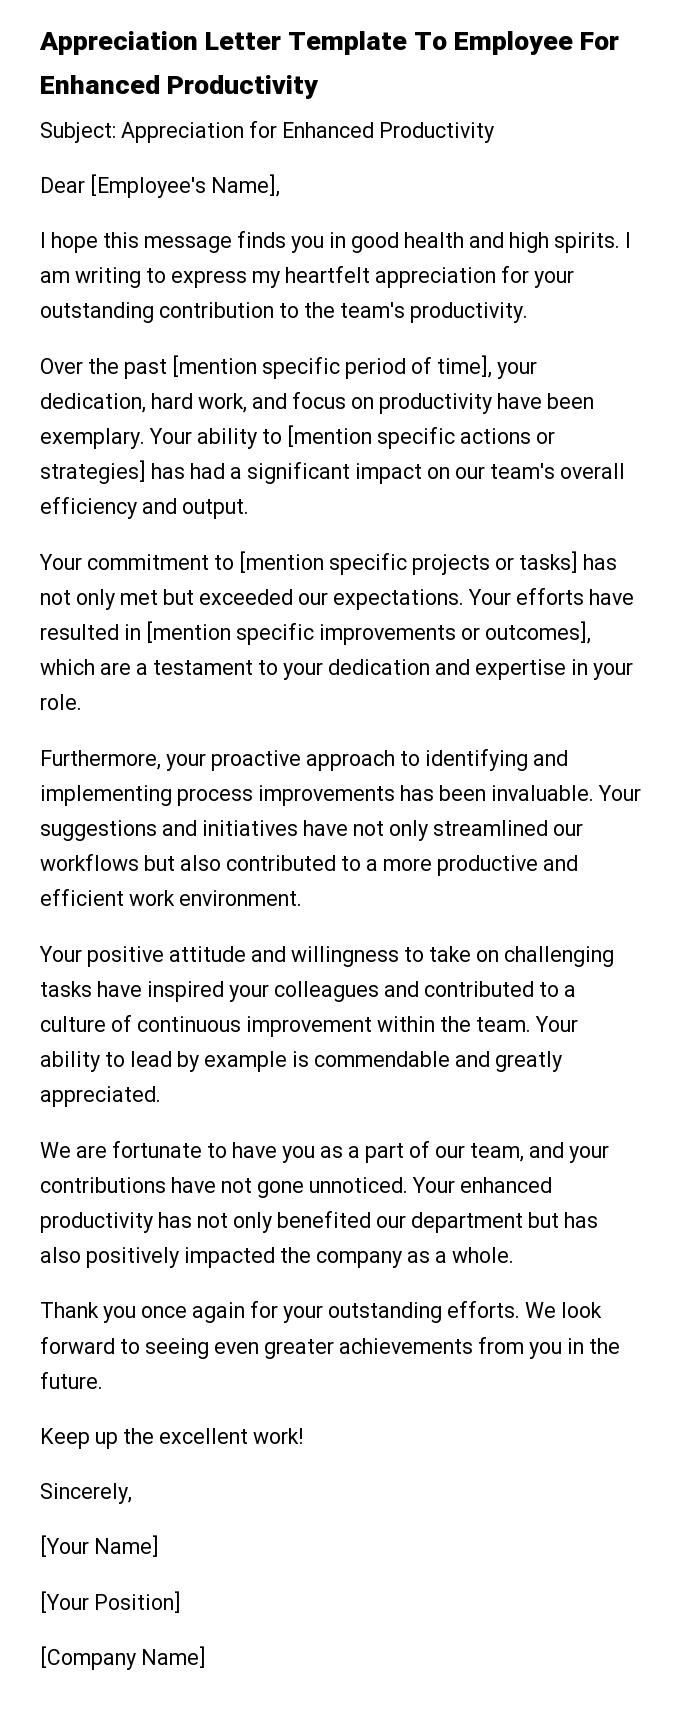 Appreciation Letter Template To Employee For Enhanced Productivity